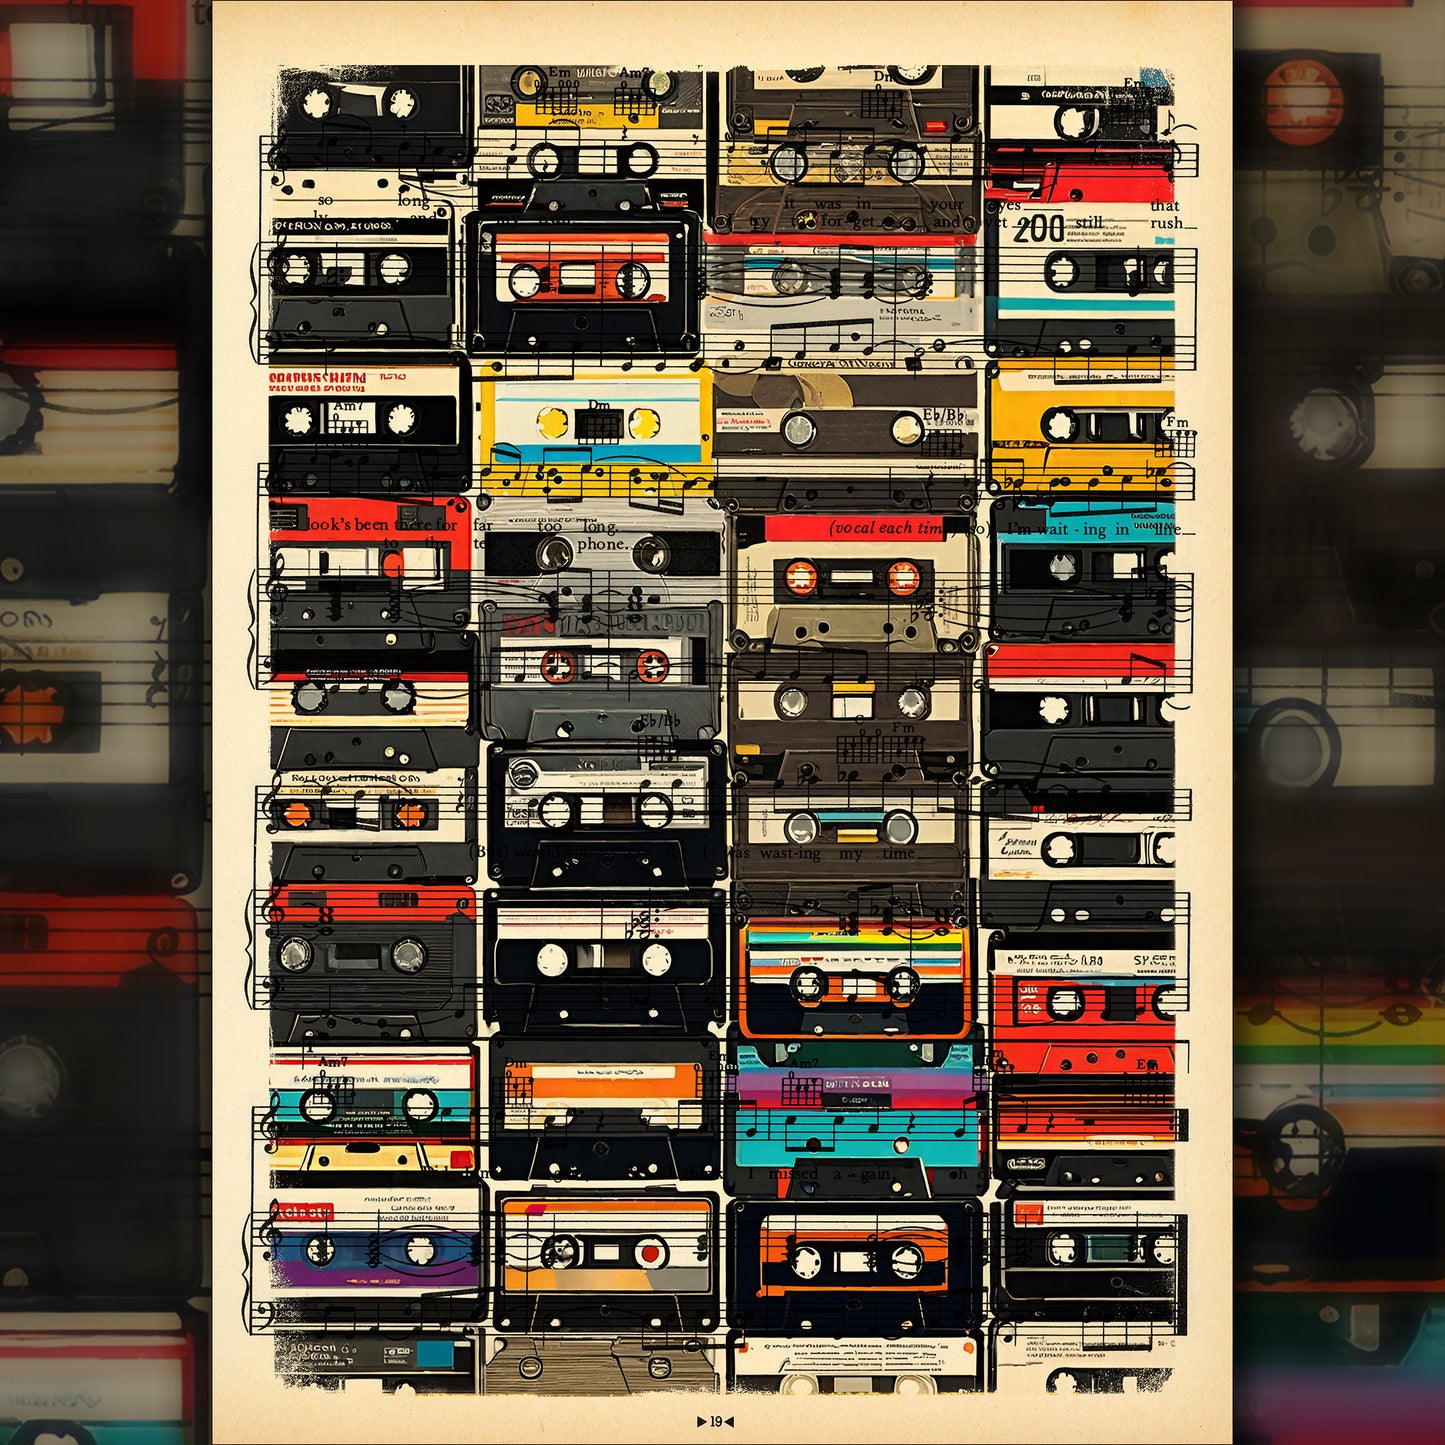 Limited edition "HiFi Retro Tape Cassette Wall" with '80s audio elements on upcycled book pages.